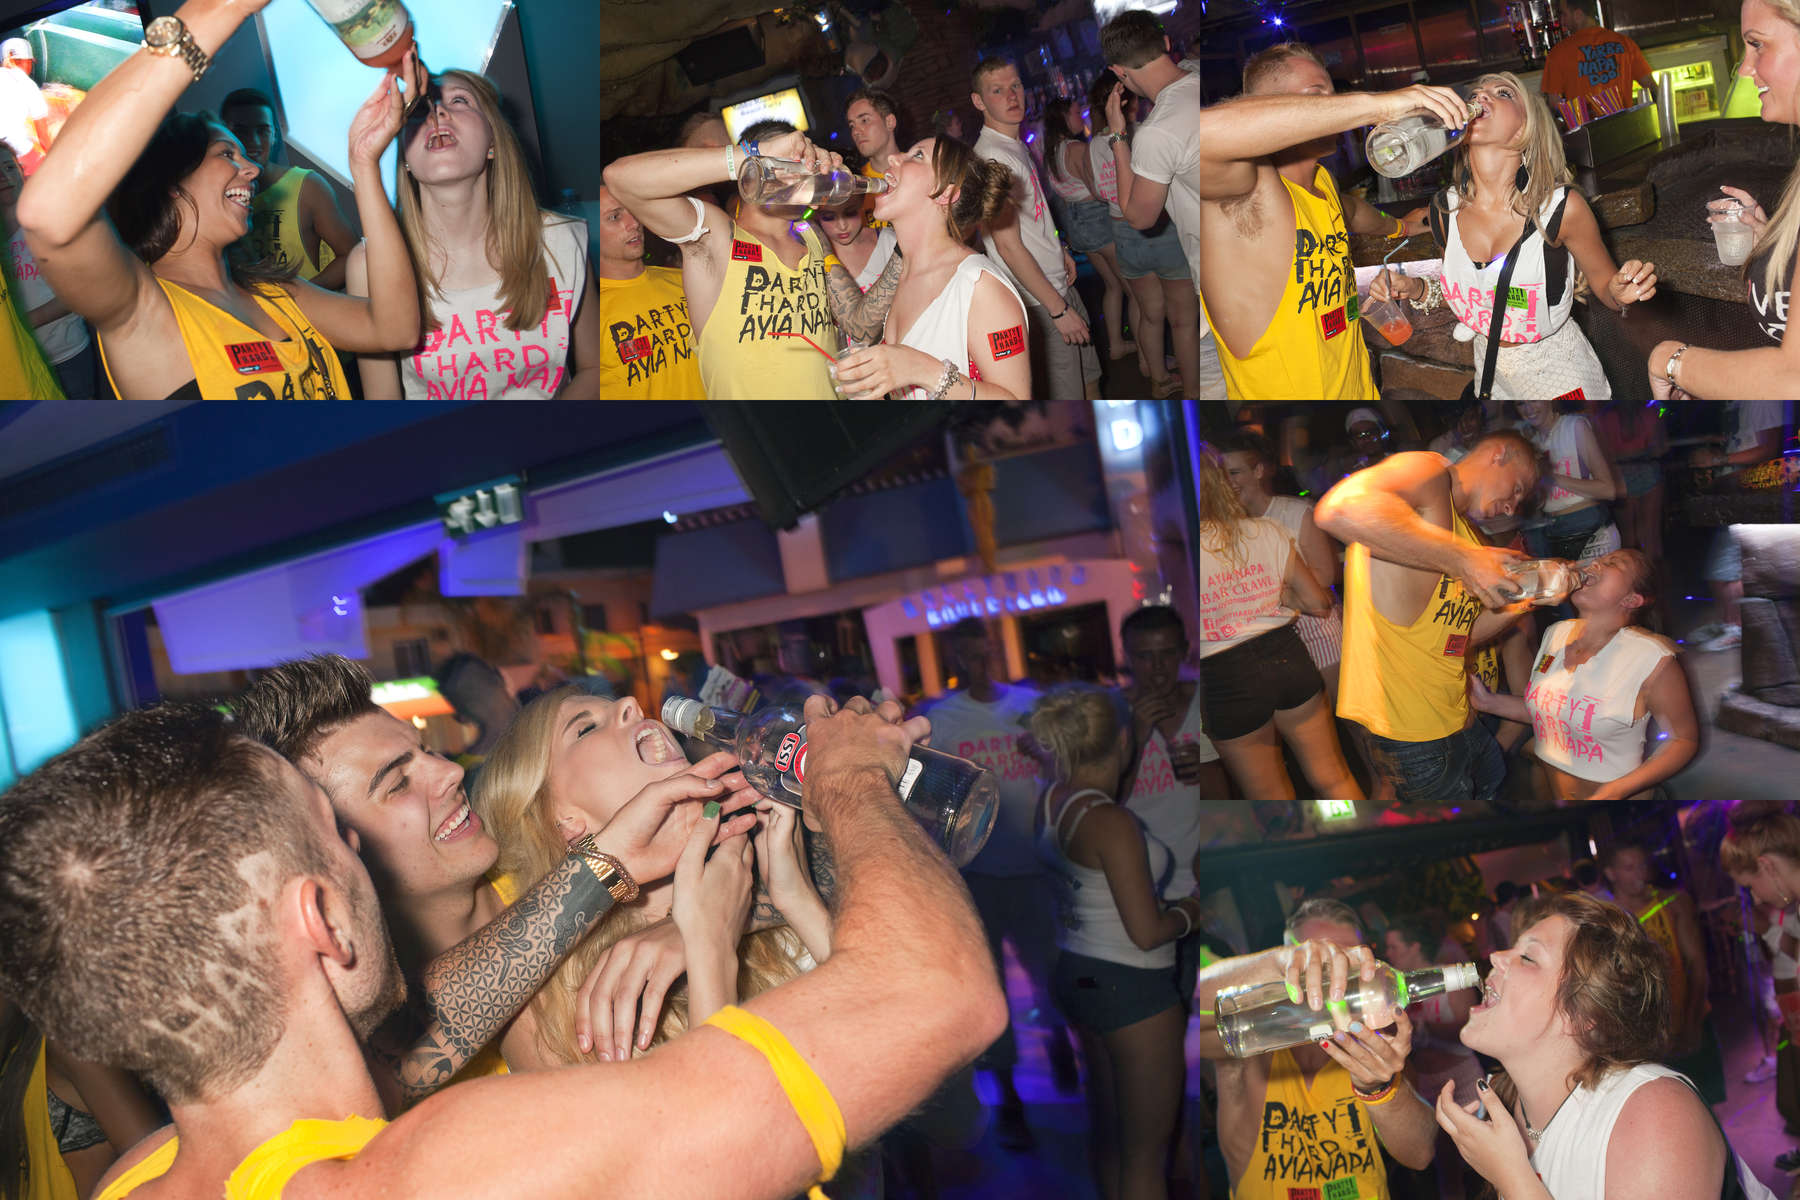 20:49 A young woman is administered some alcohol by Party Hard bar crawl staff at Ice Lounge, Ayia Napa, Cyprus.